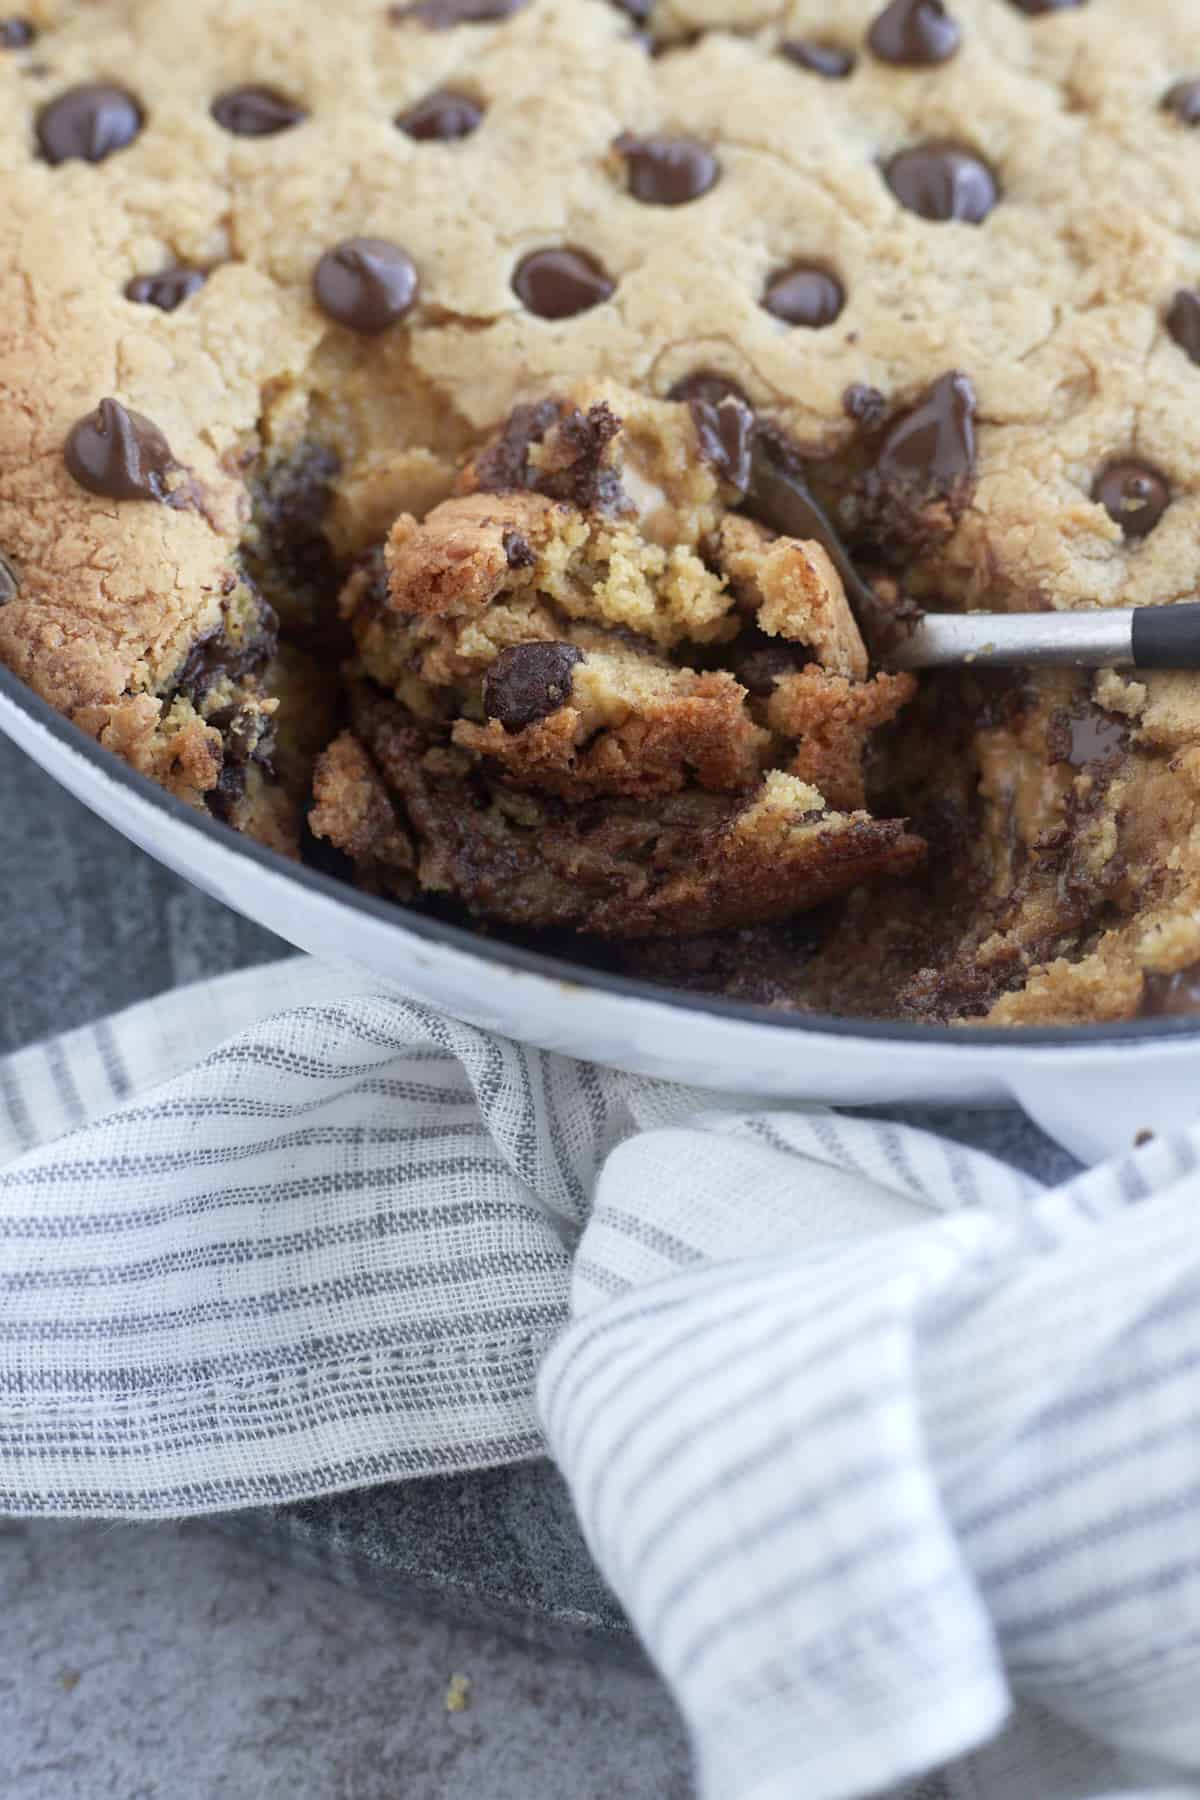 a spoon scooping a bite from a peanut butter chocolate chip cookie skillet